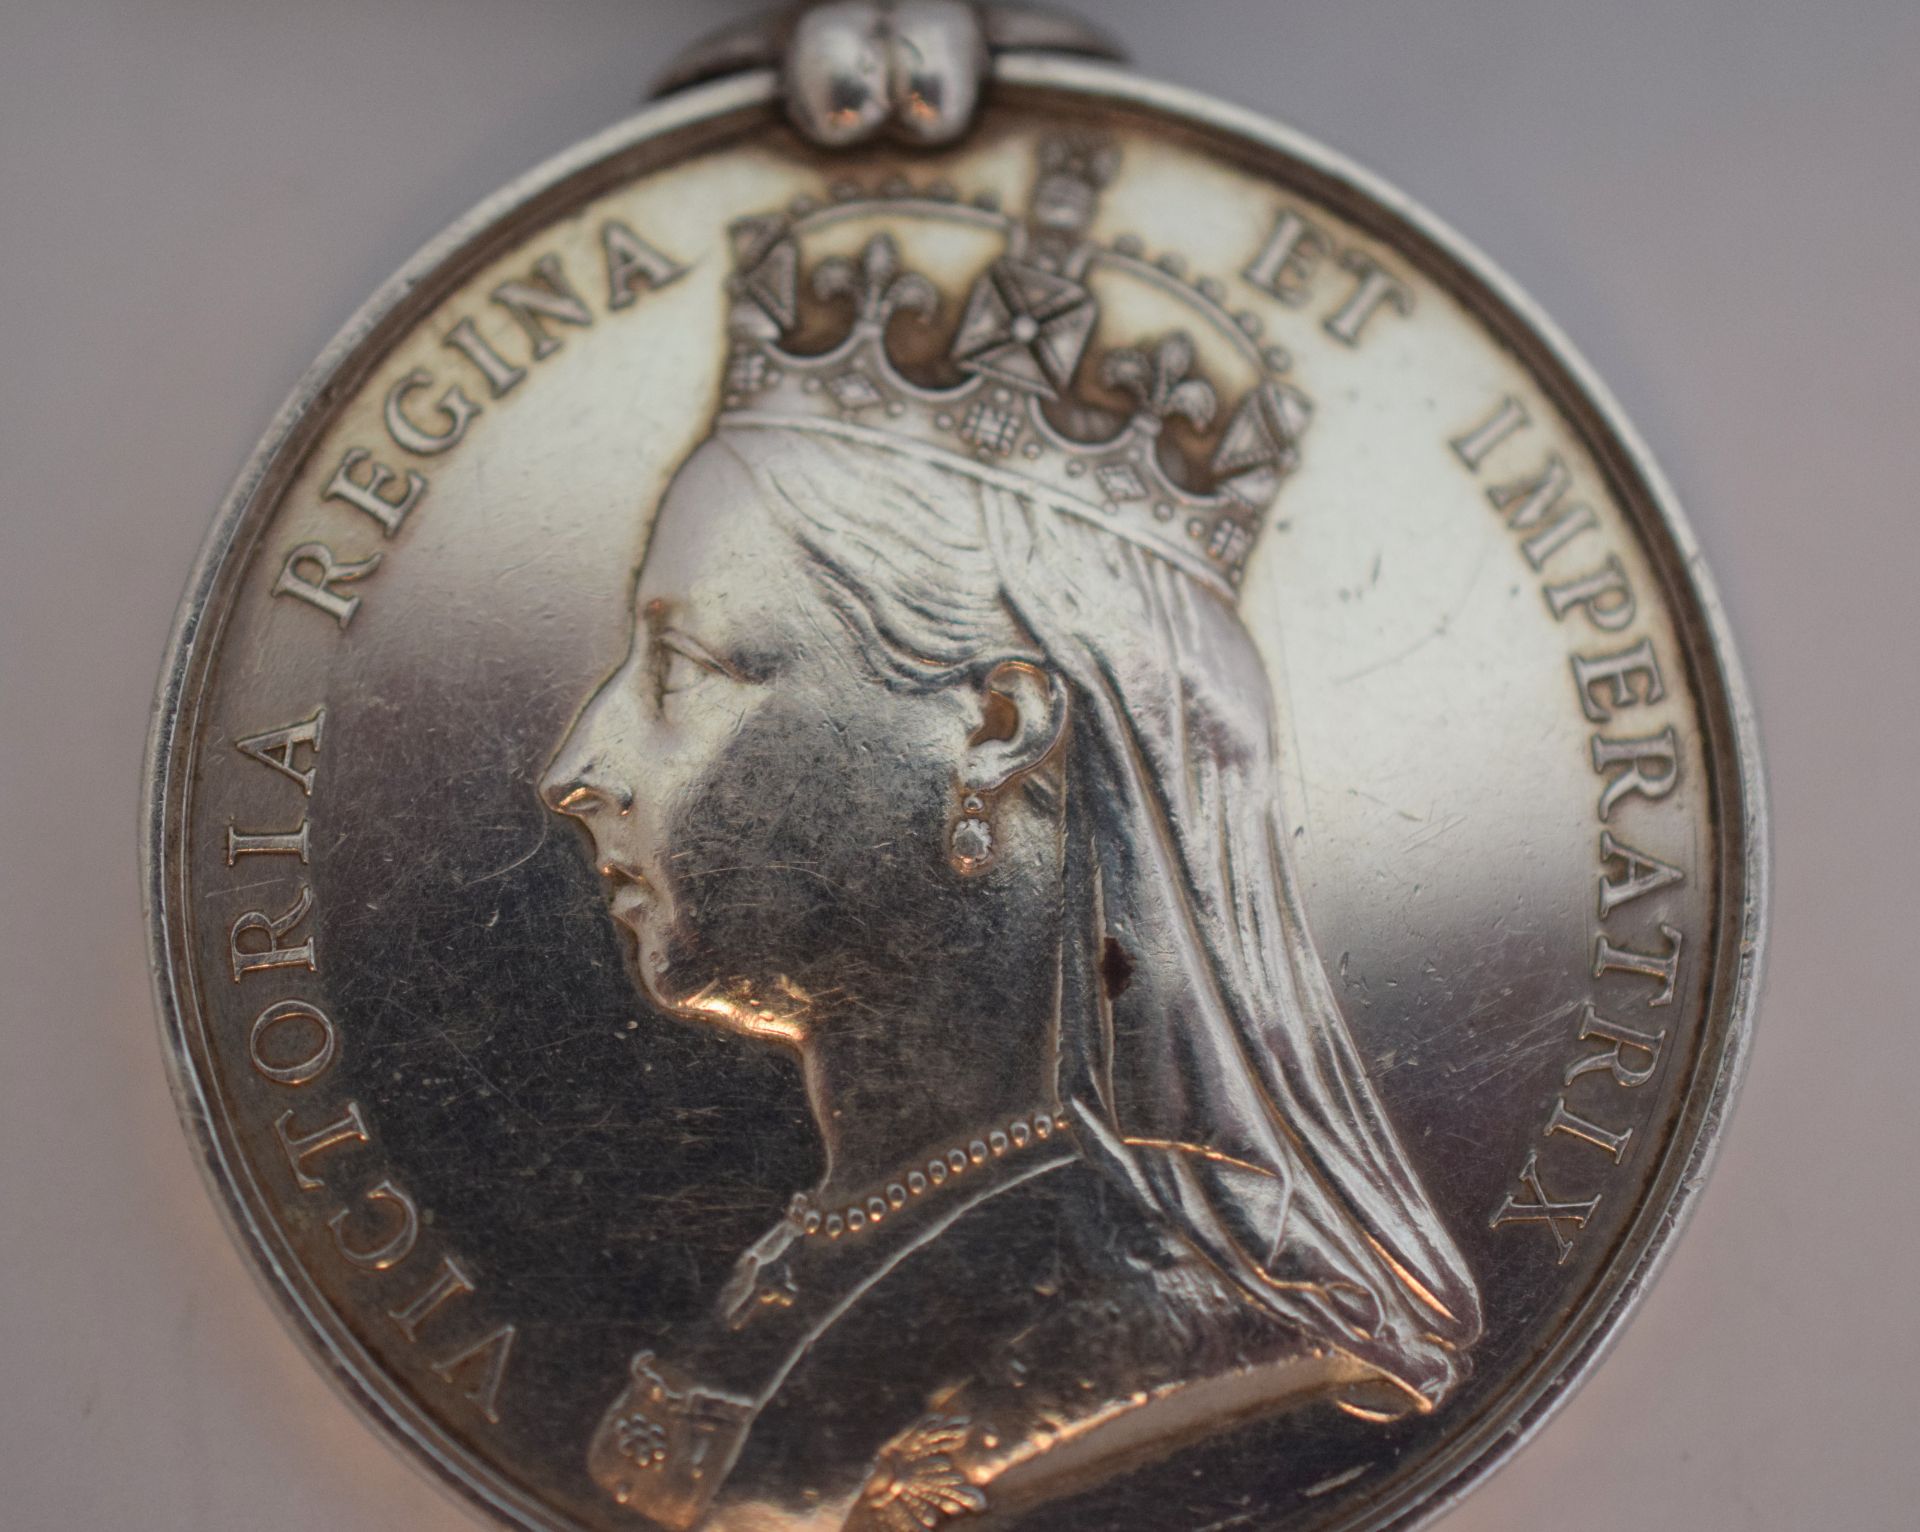 Afganistan 1878/79/80s Silver Medal With Bar - Image 2 of 6